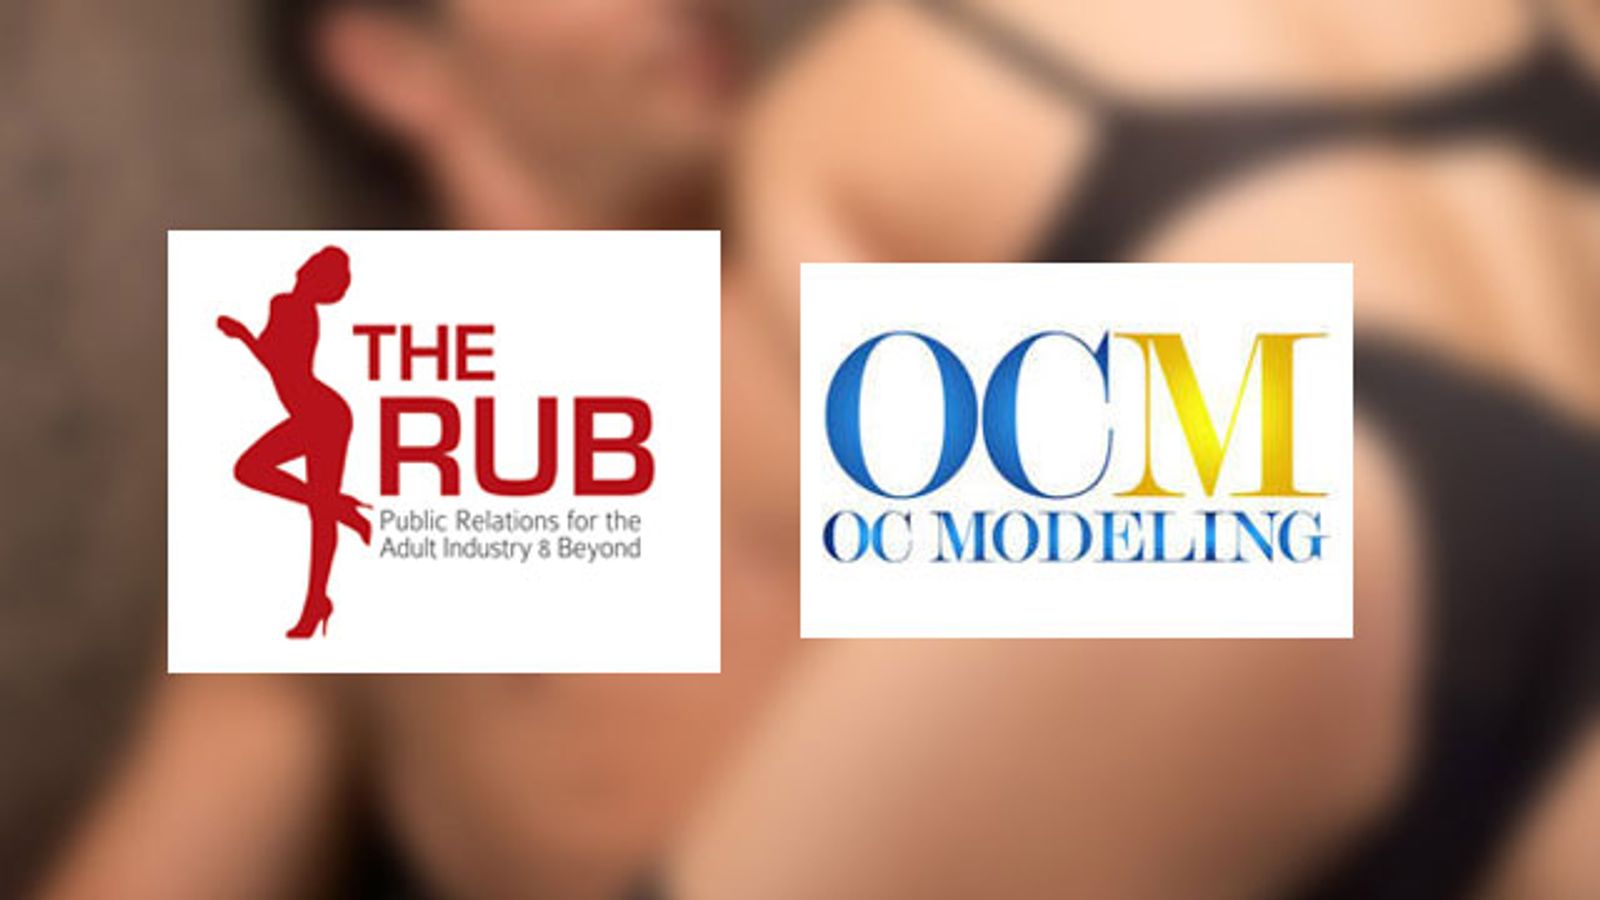 OC Modeling, The Rub PR Form a Different Type of Partnership